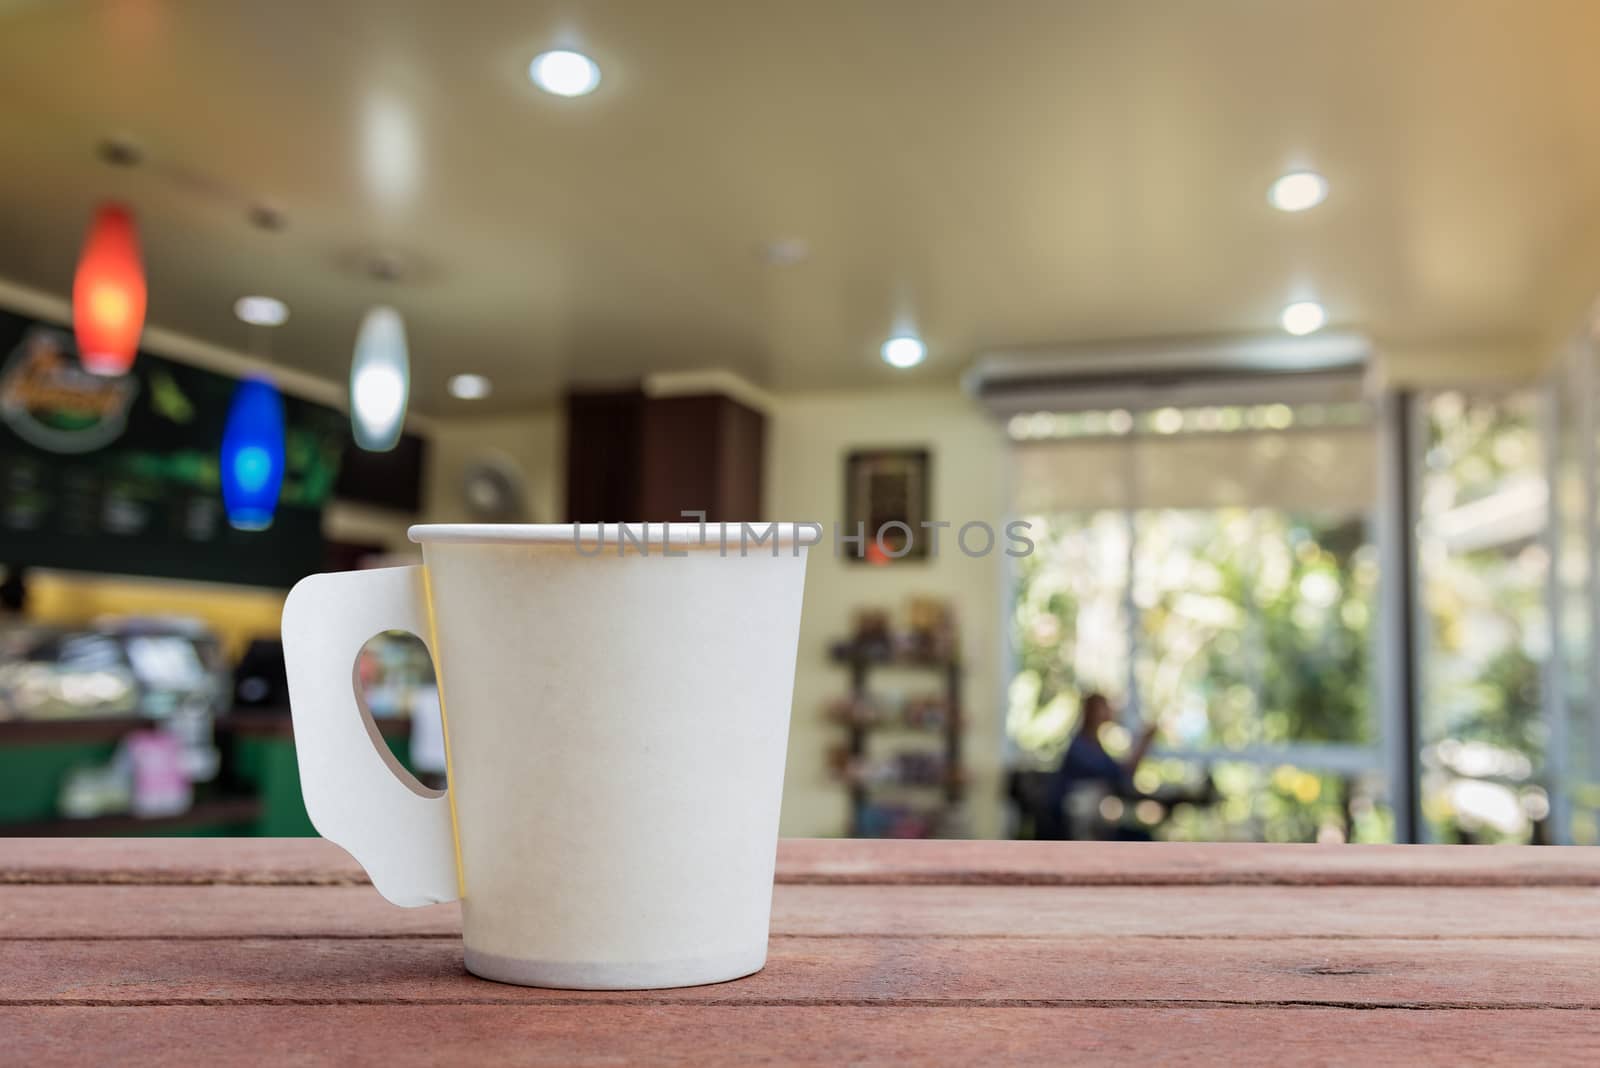 Coffee paper cup in coffee shop blur background